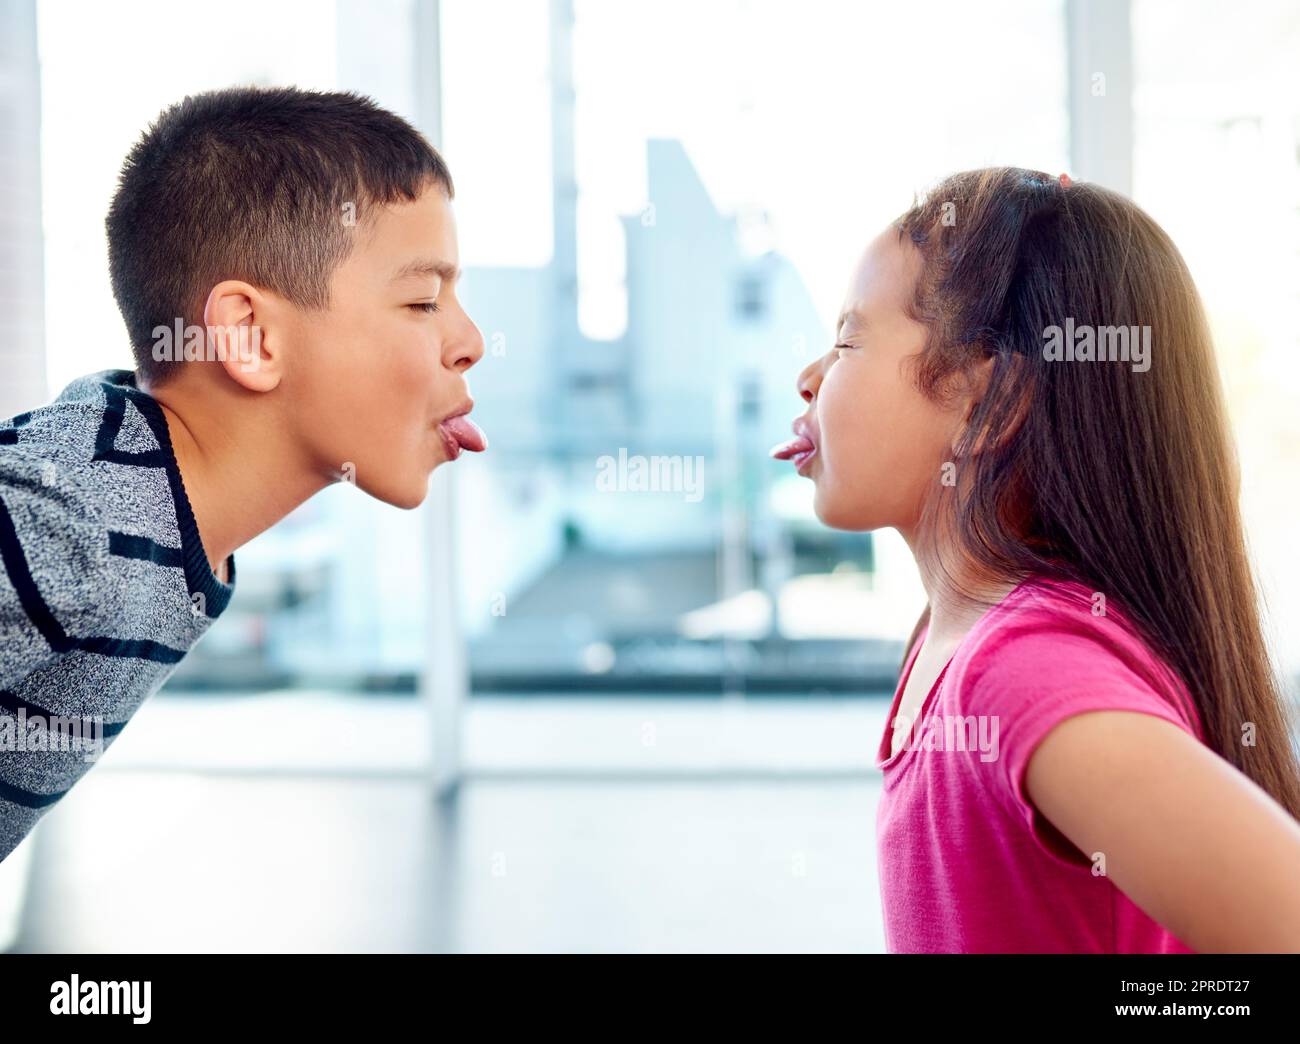 Theyre always making fun of each other. two naughty young children sticking their tongues out at each other while playing at home. Stock Photo